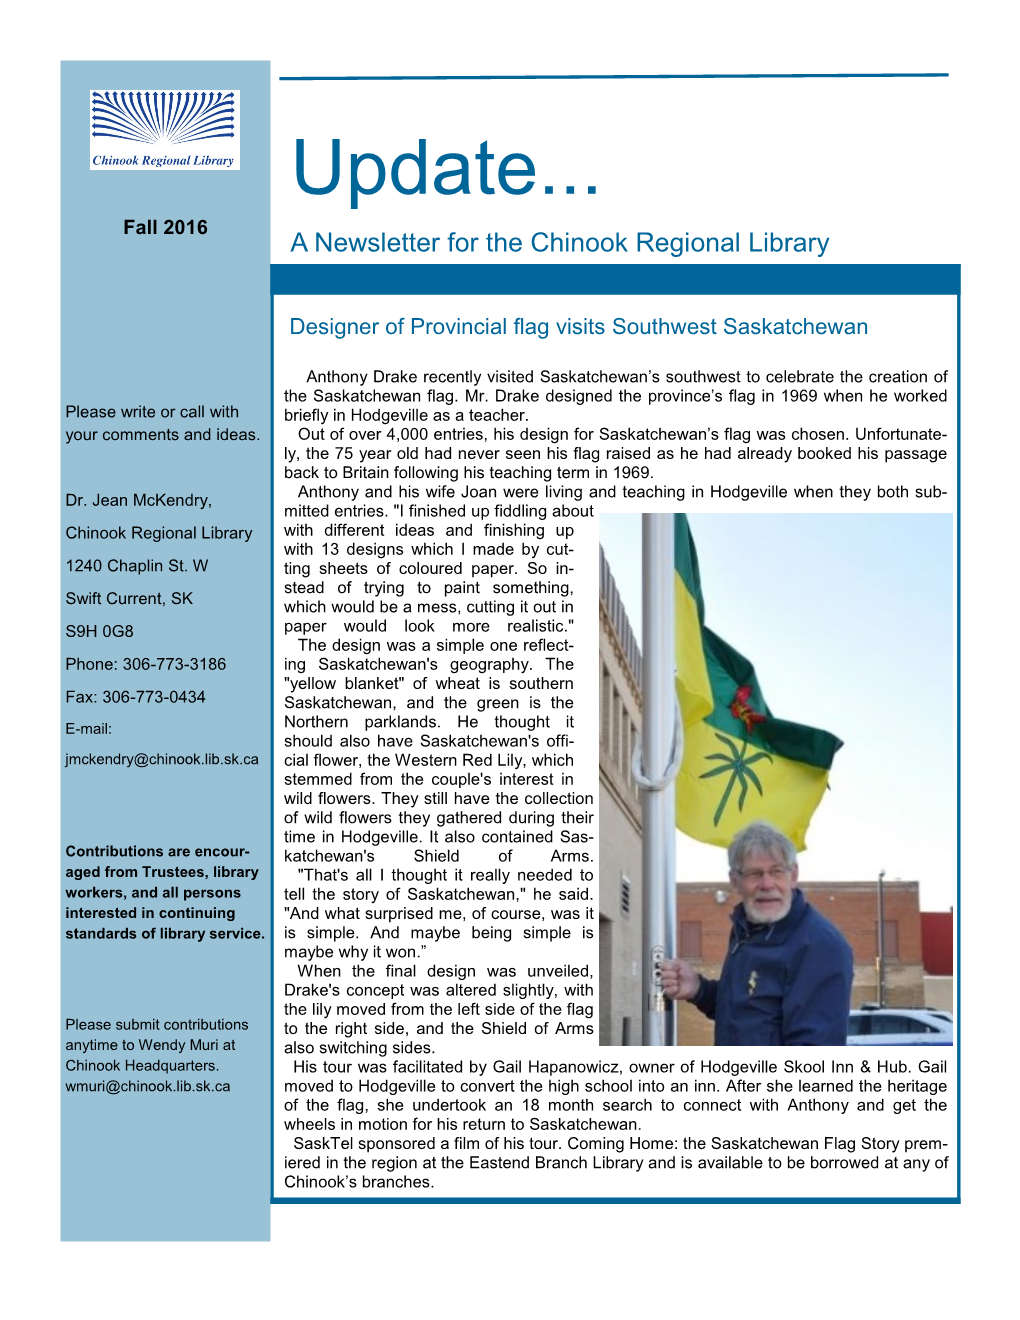 Update... Fall 2016 a Newsletter for the Chinook Regional Library